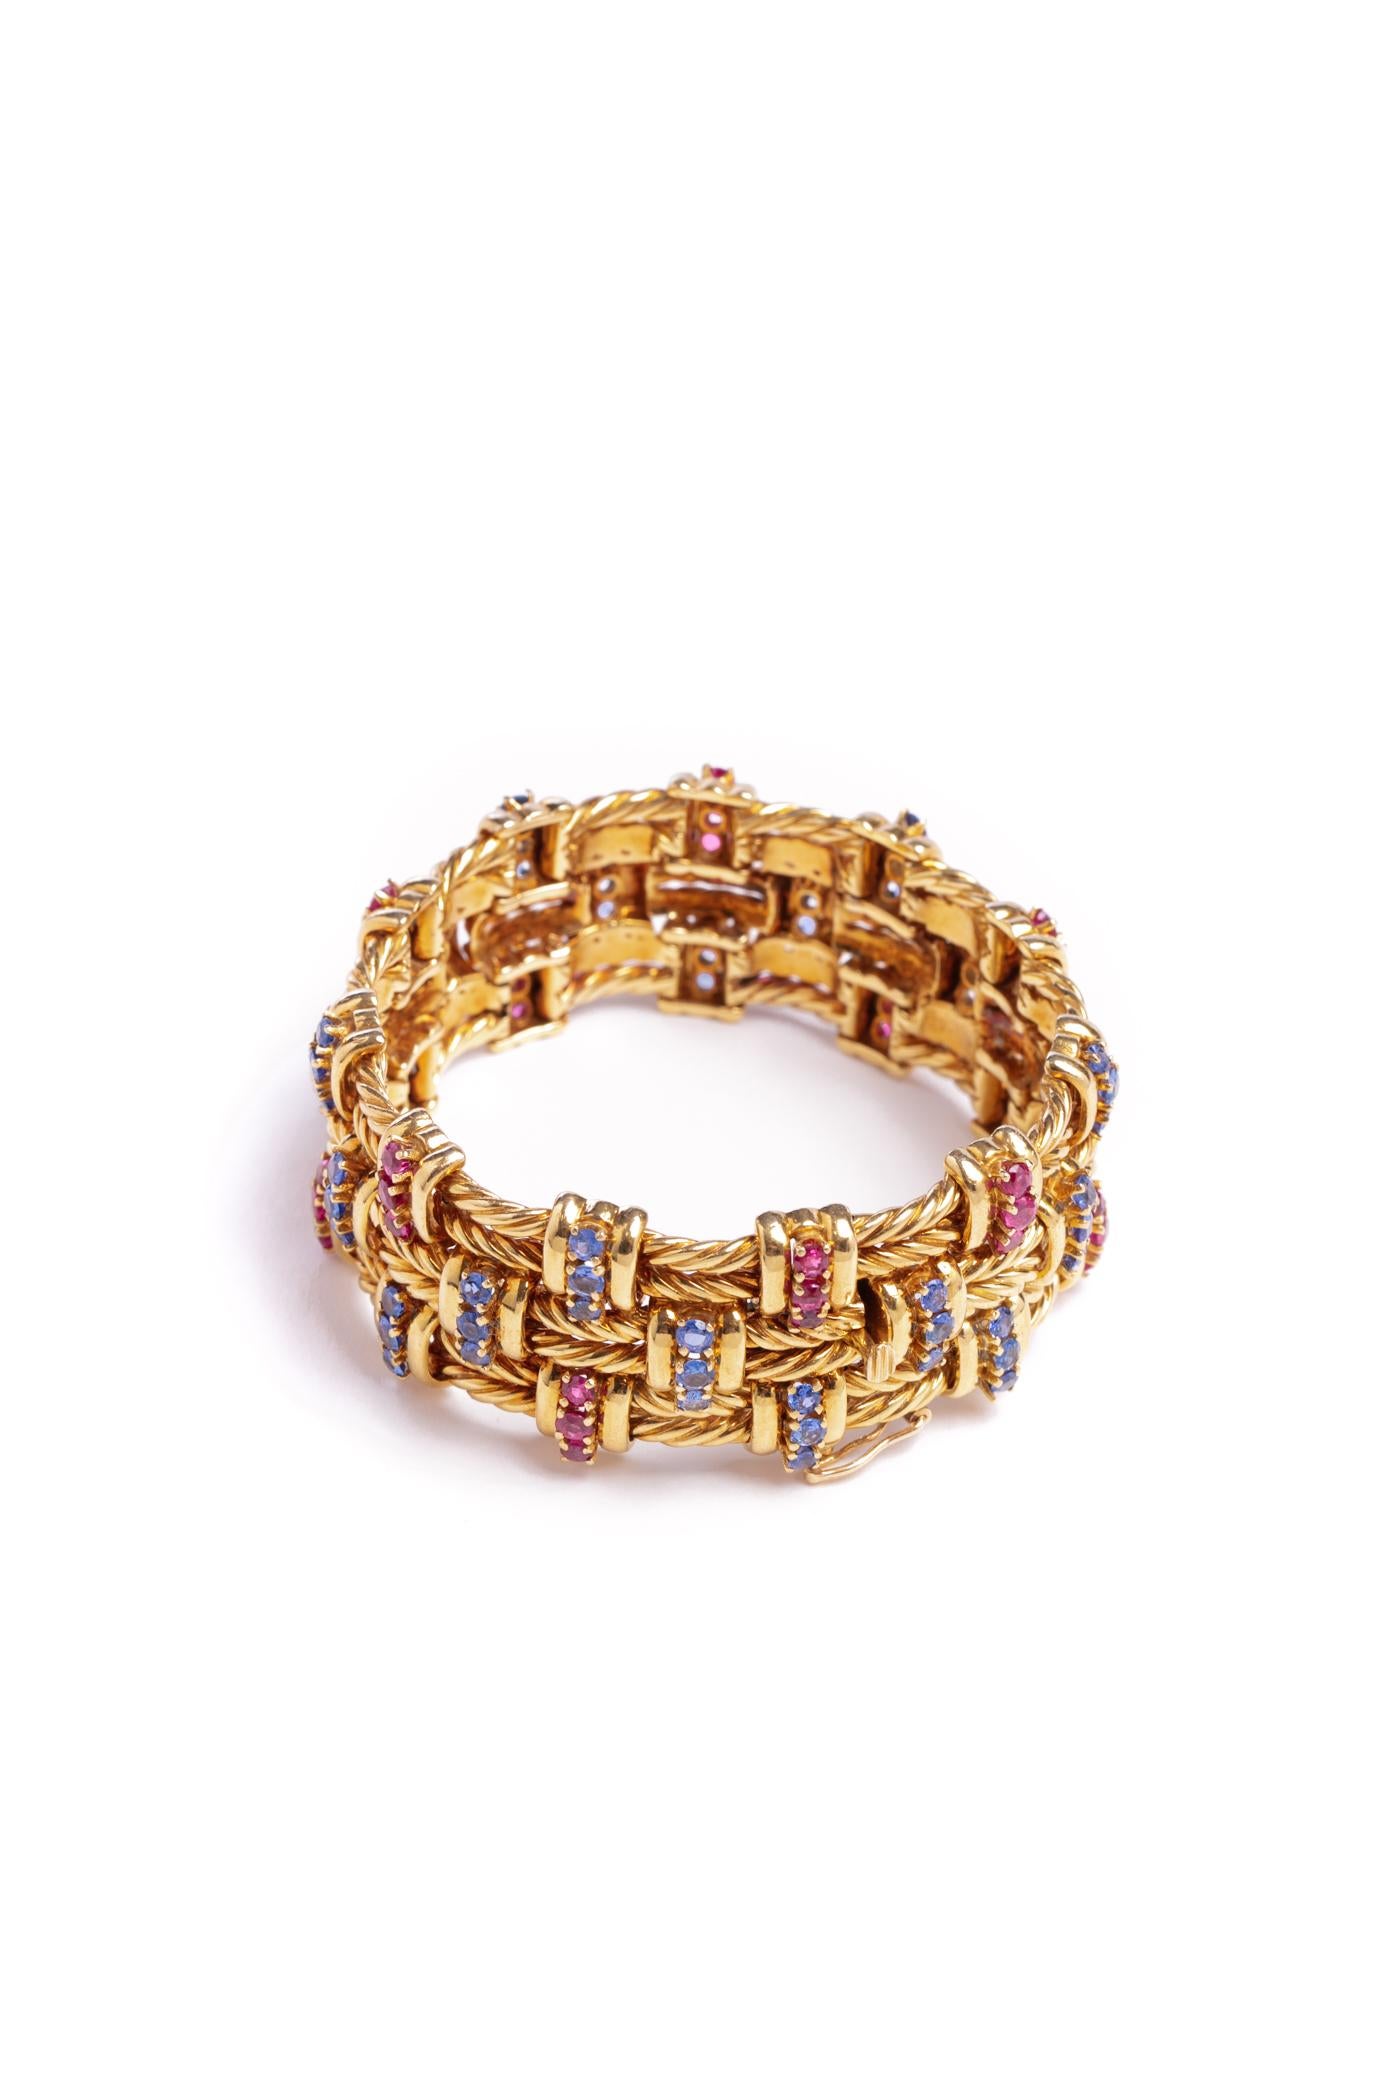 18kt yellow gold woven bracelet with approximately 6cts of rubies and sapphires.
